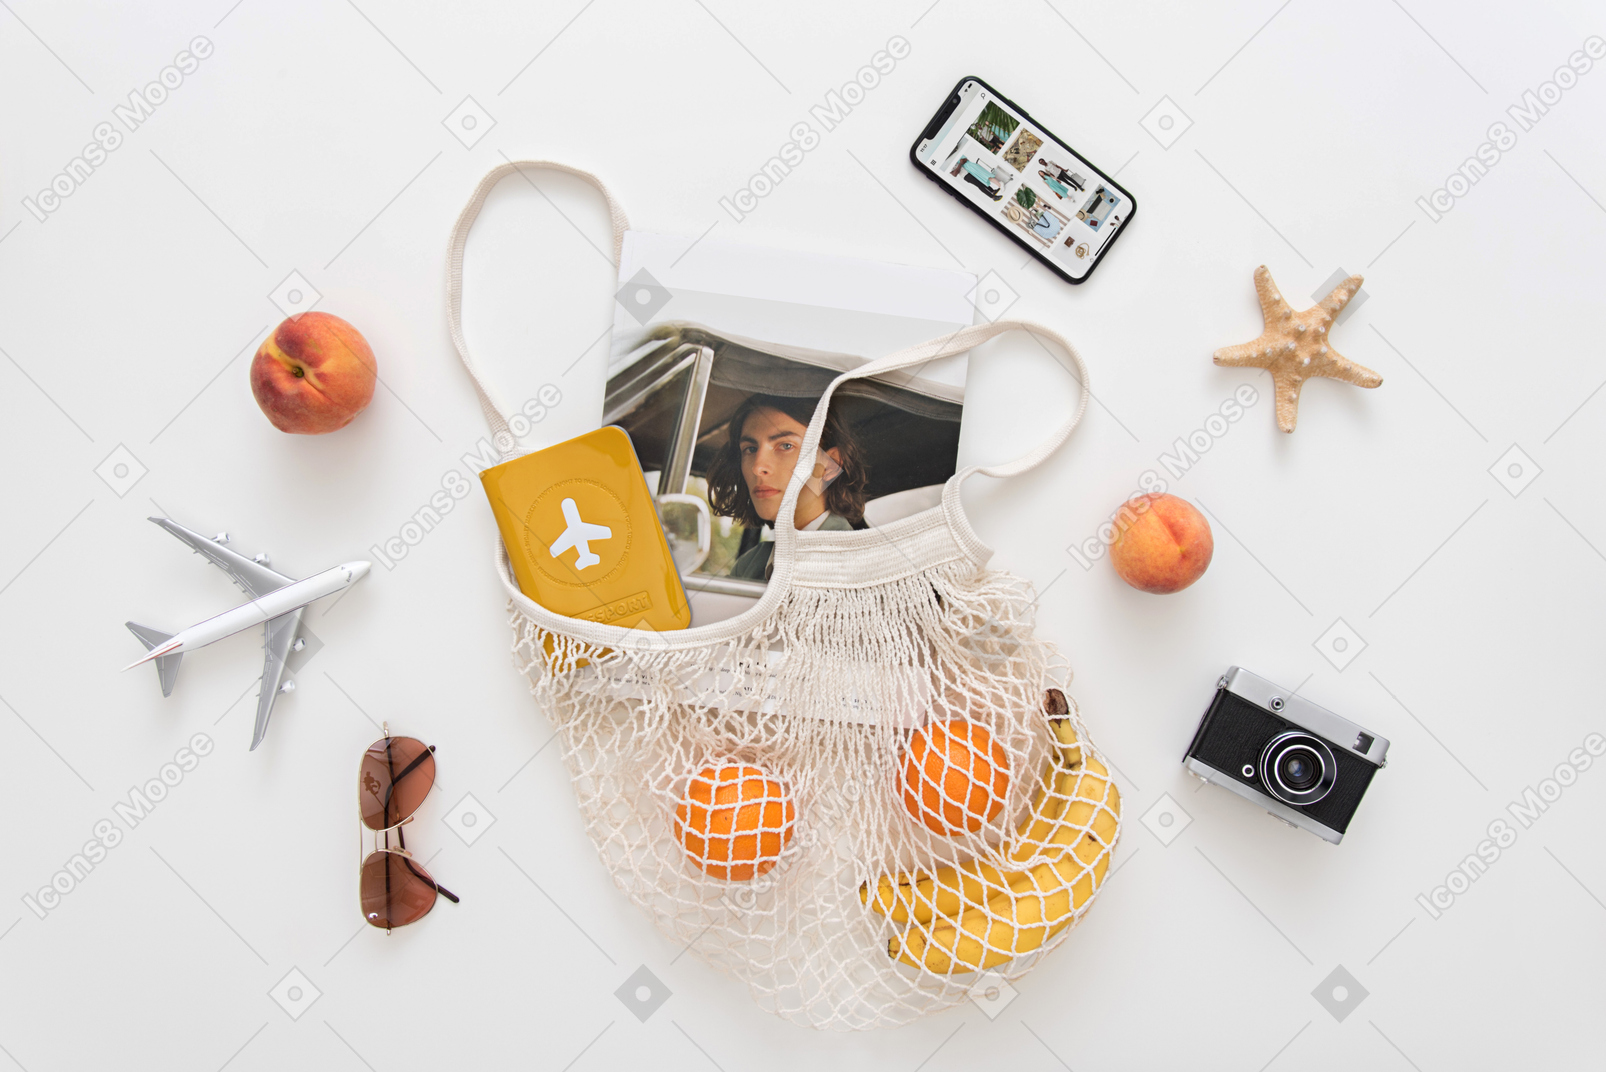 Avoska with fruits, passport cover, magazine, airplane model, sunglasses, vintage camera and smartphone